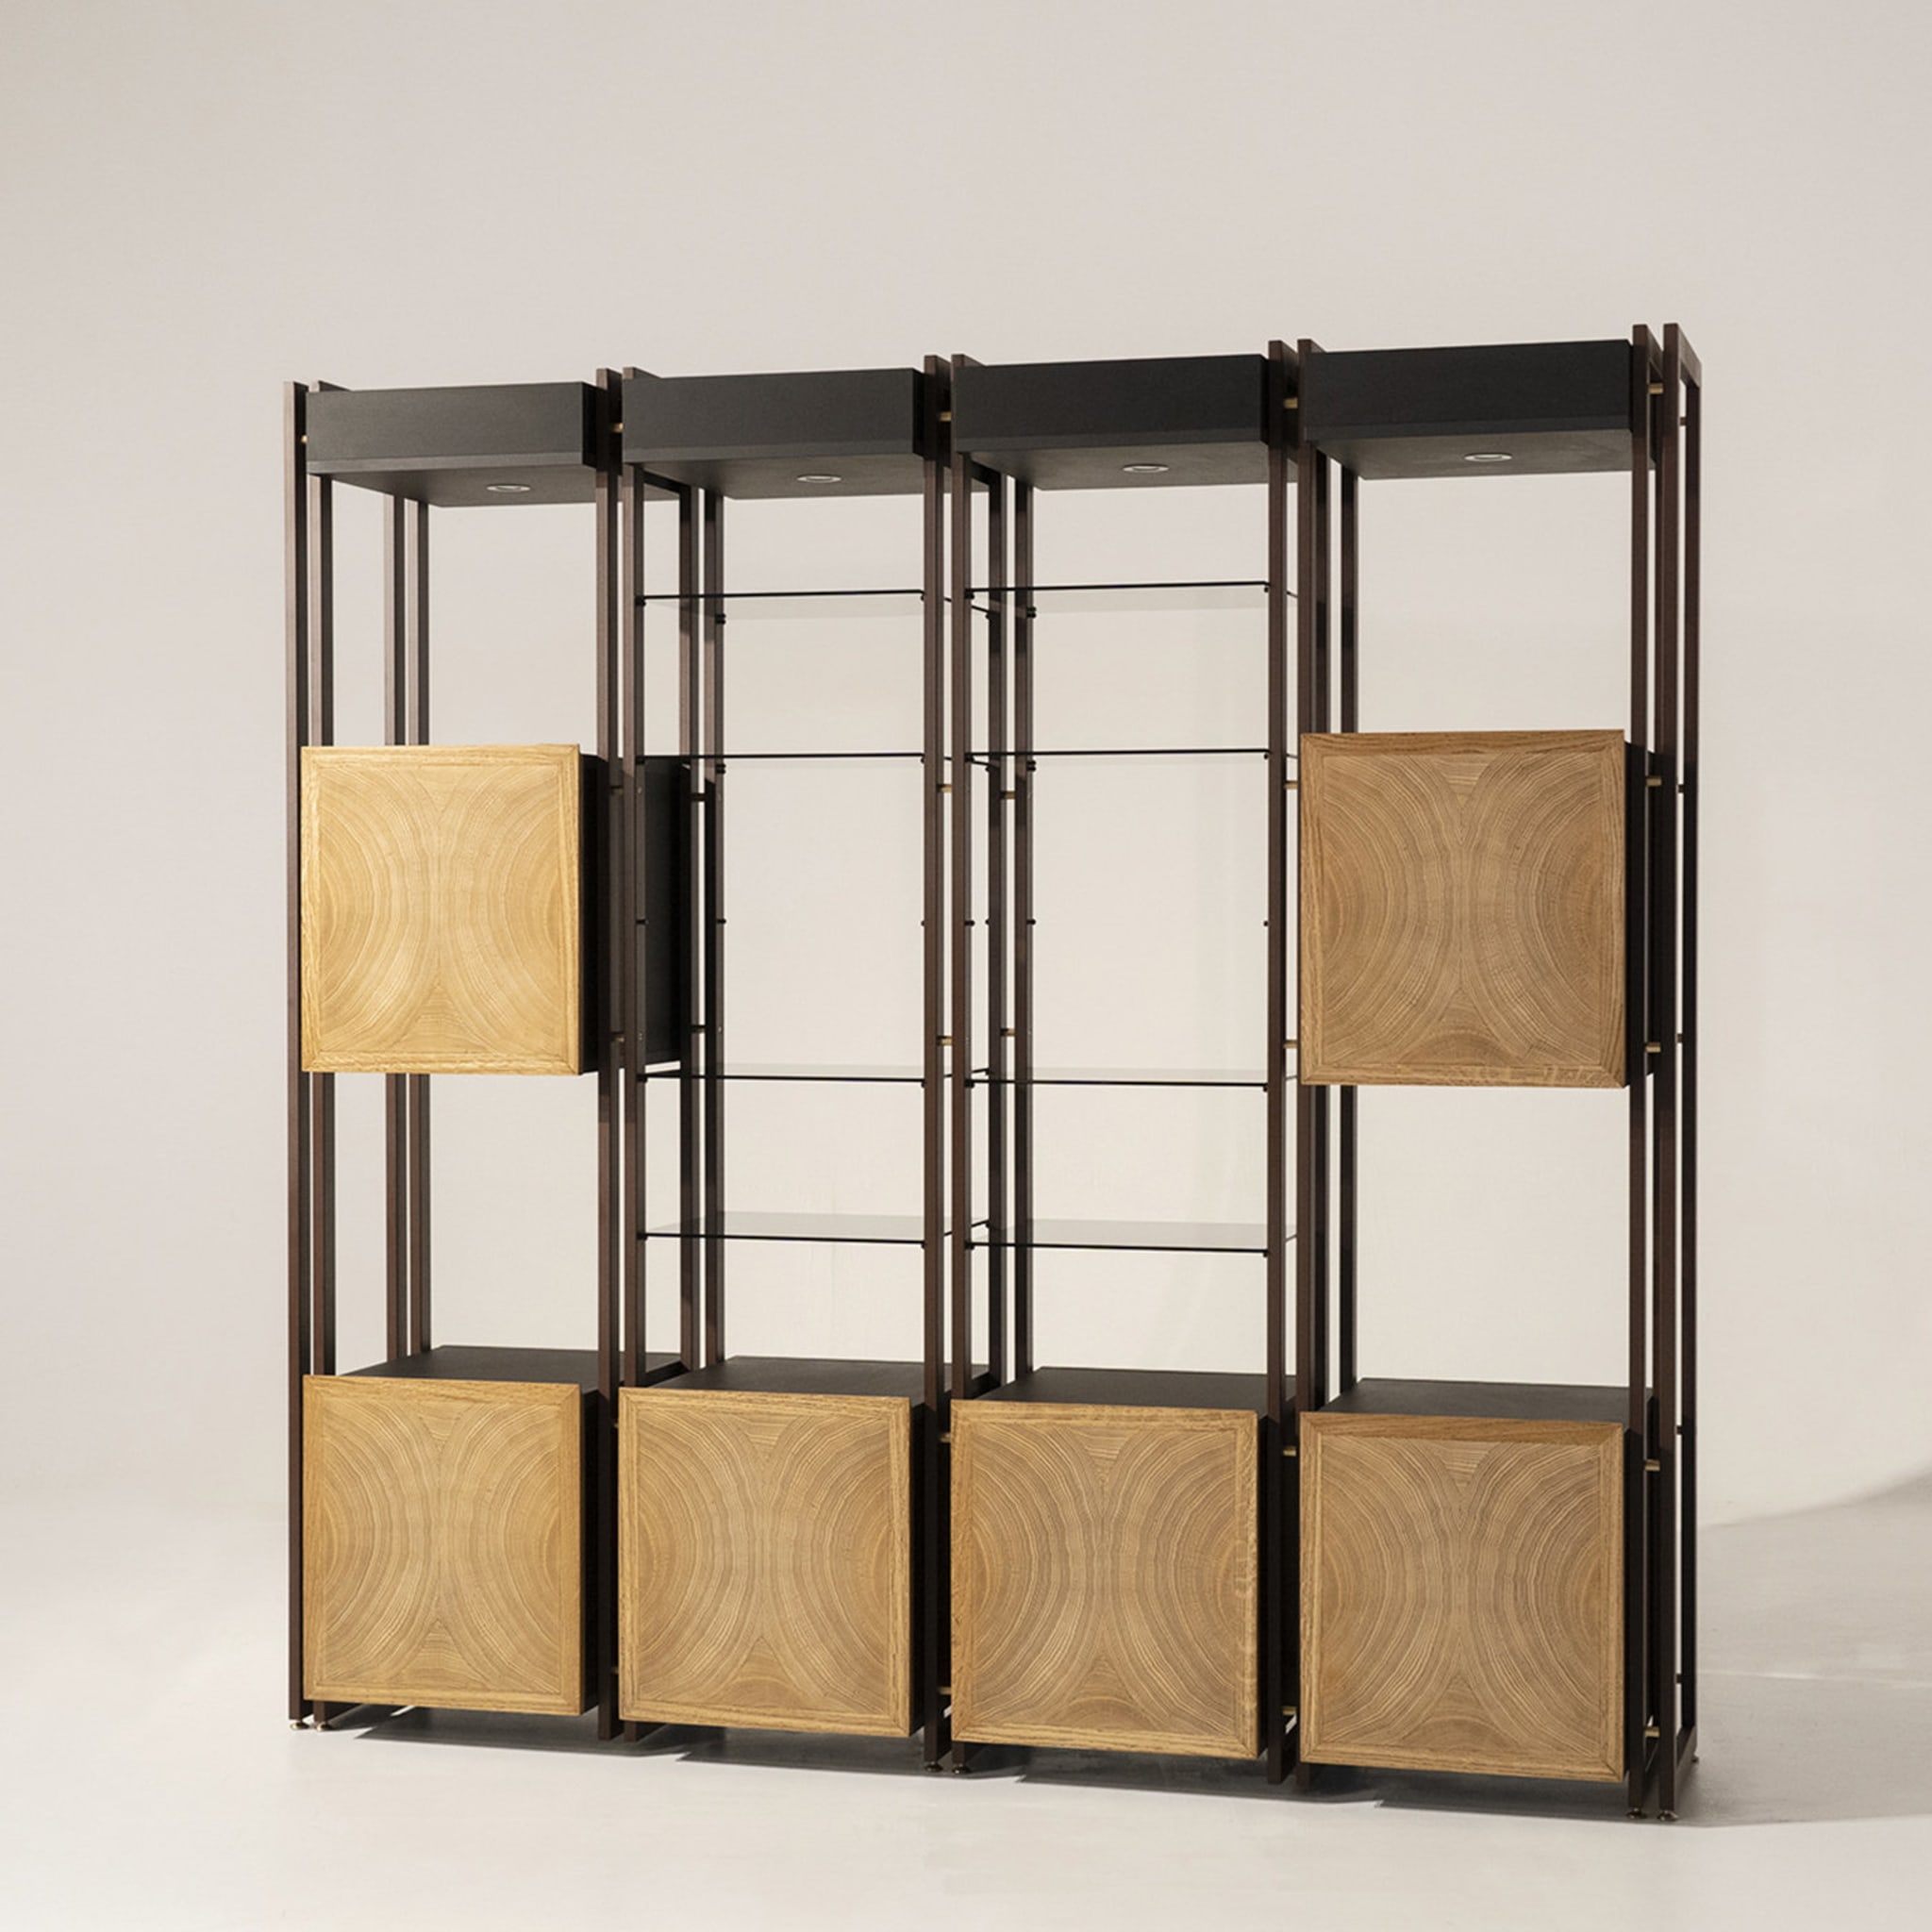 Tury Bookcase Tribeca Collection by Marco and Giulio Mantellassi  - Alternative view 1